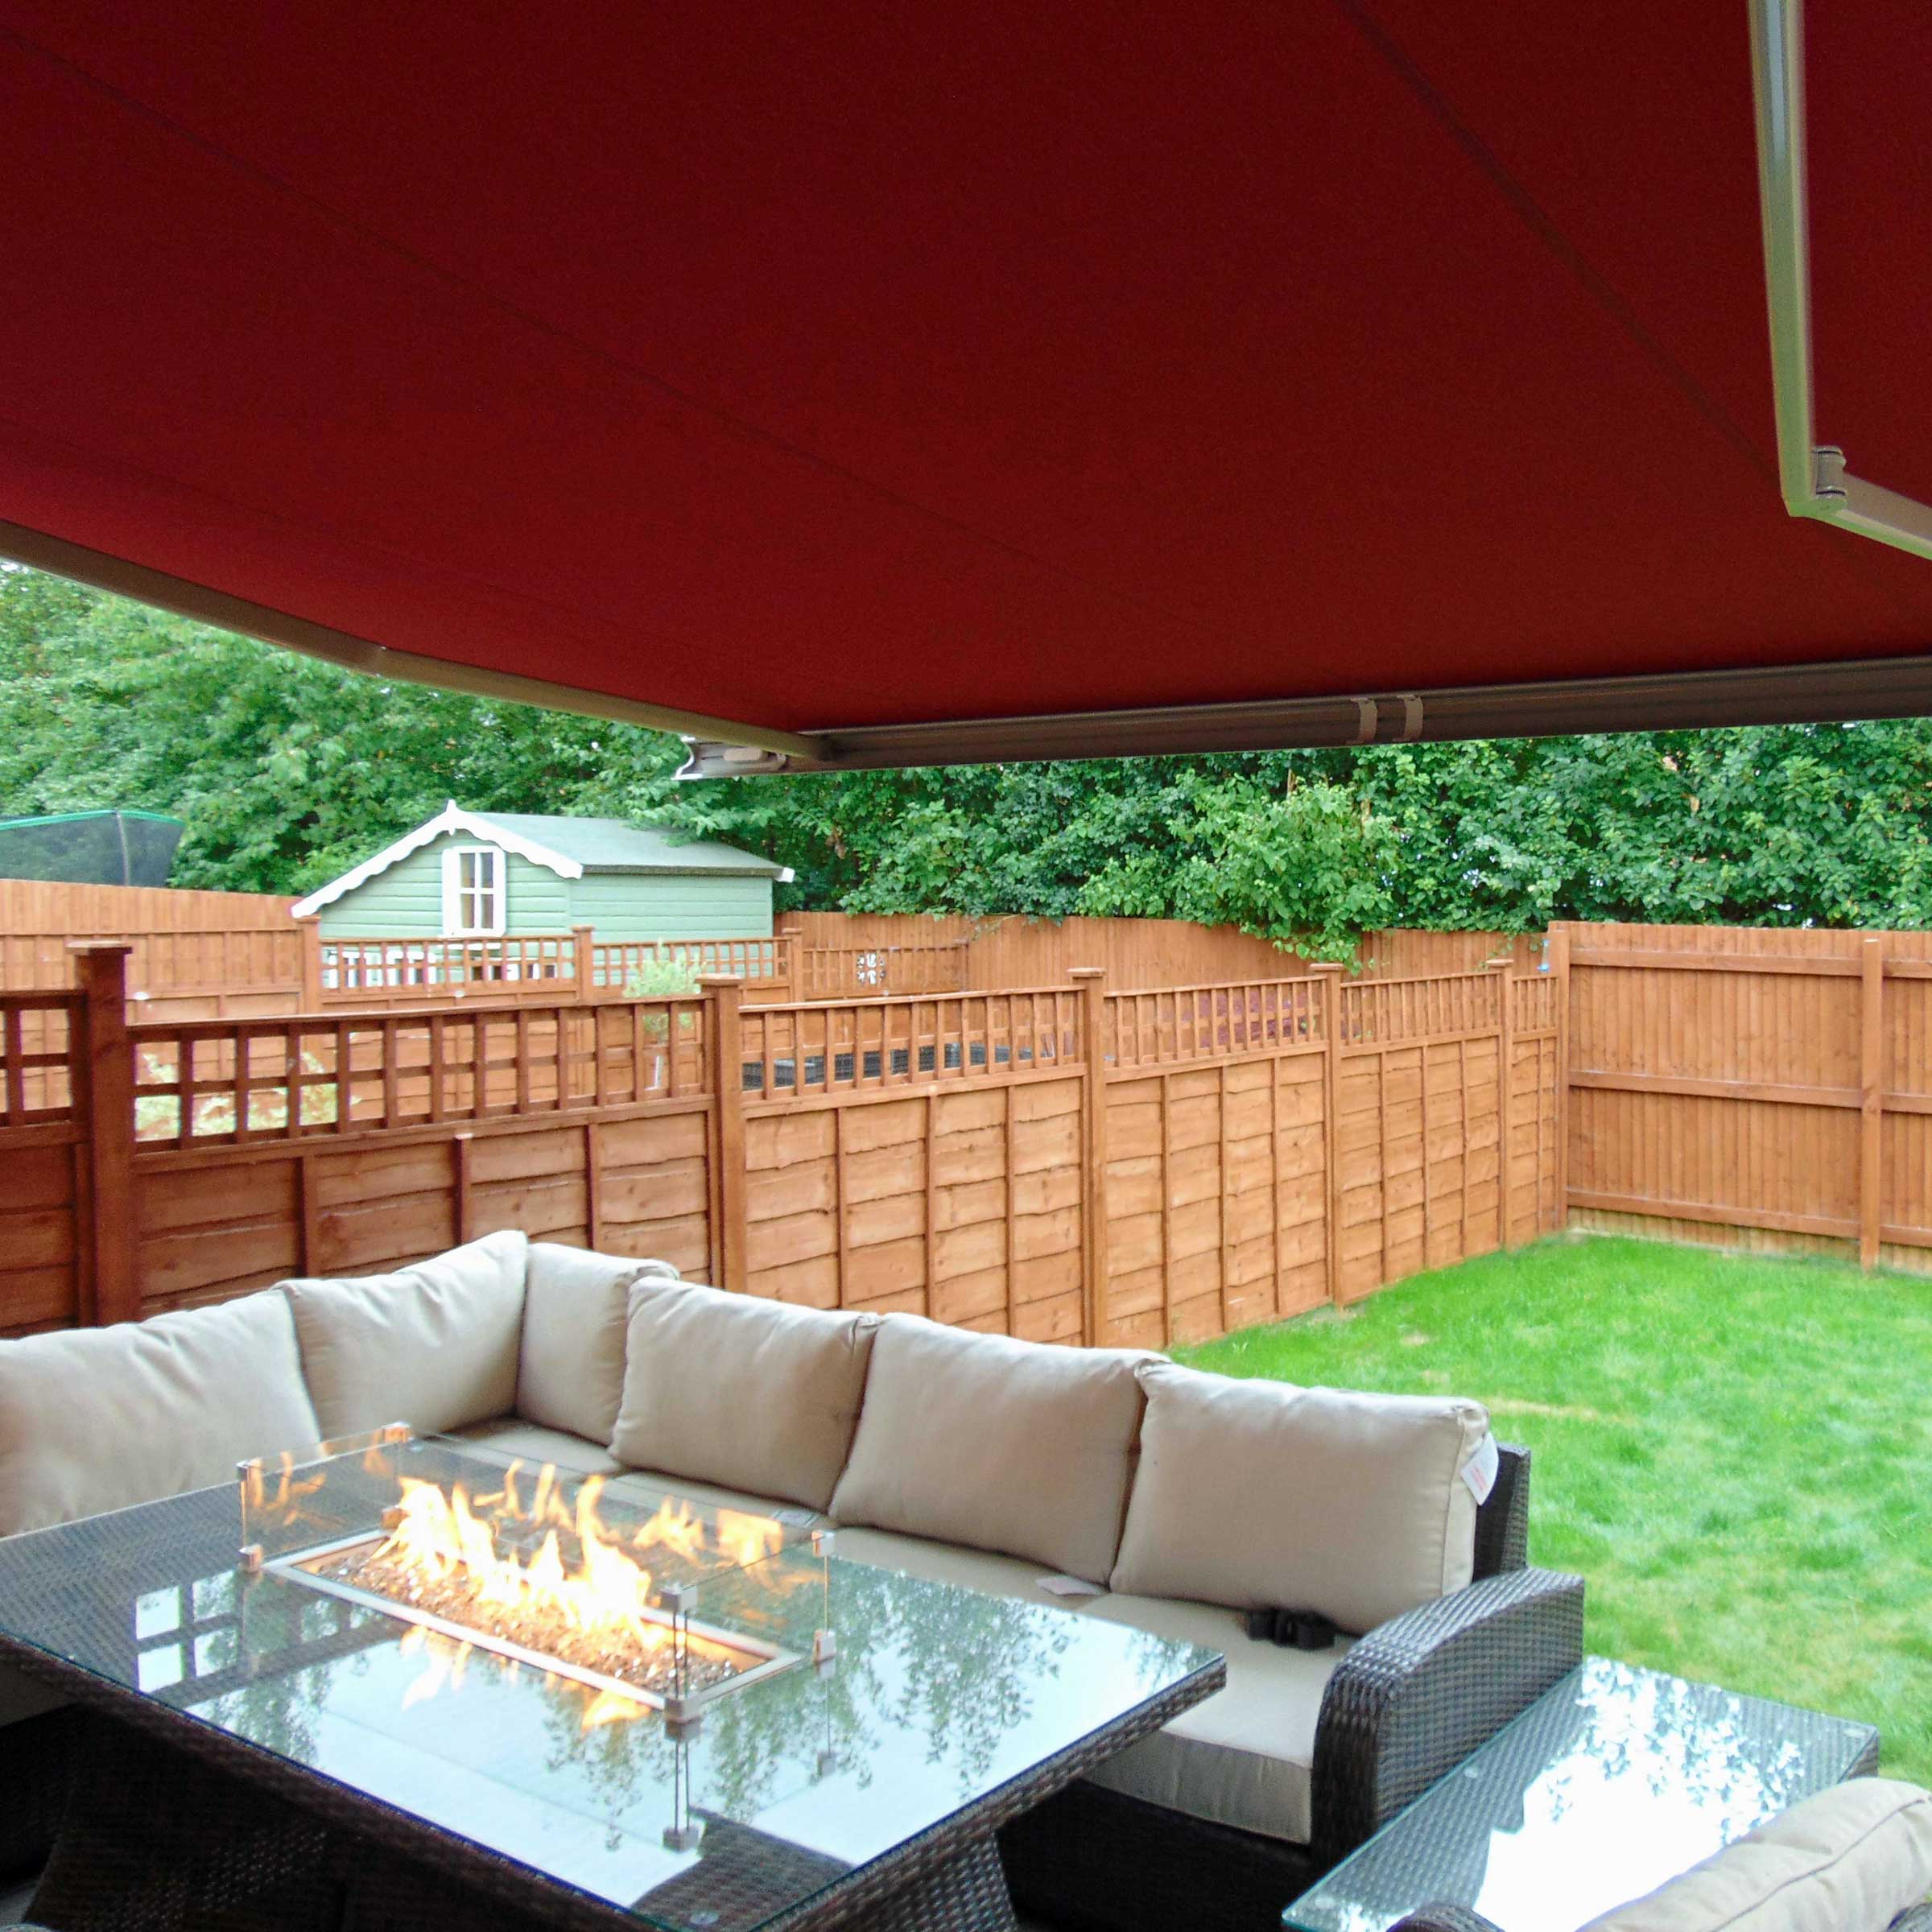 An impressive patio area covered by an Alcas Awning